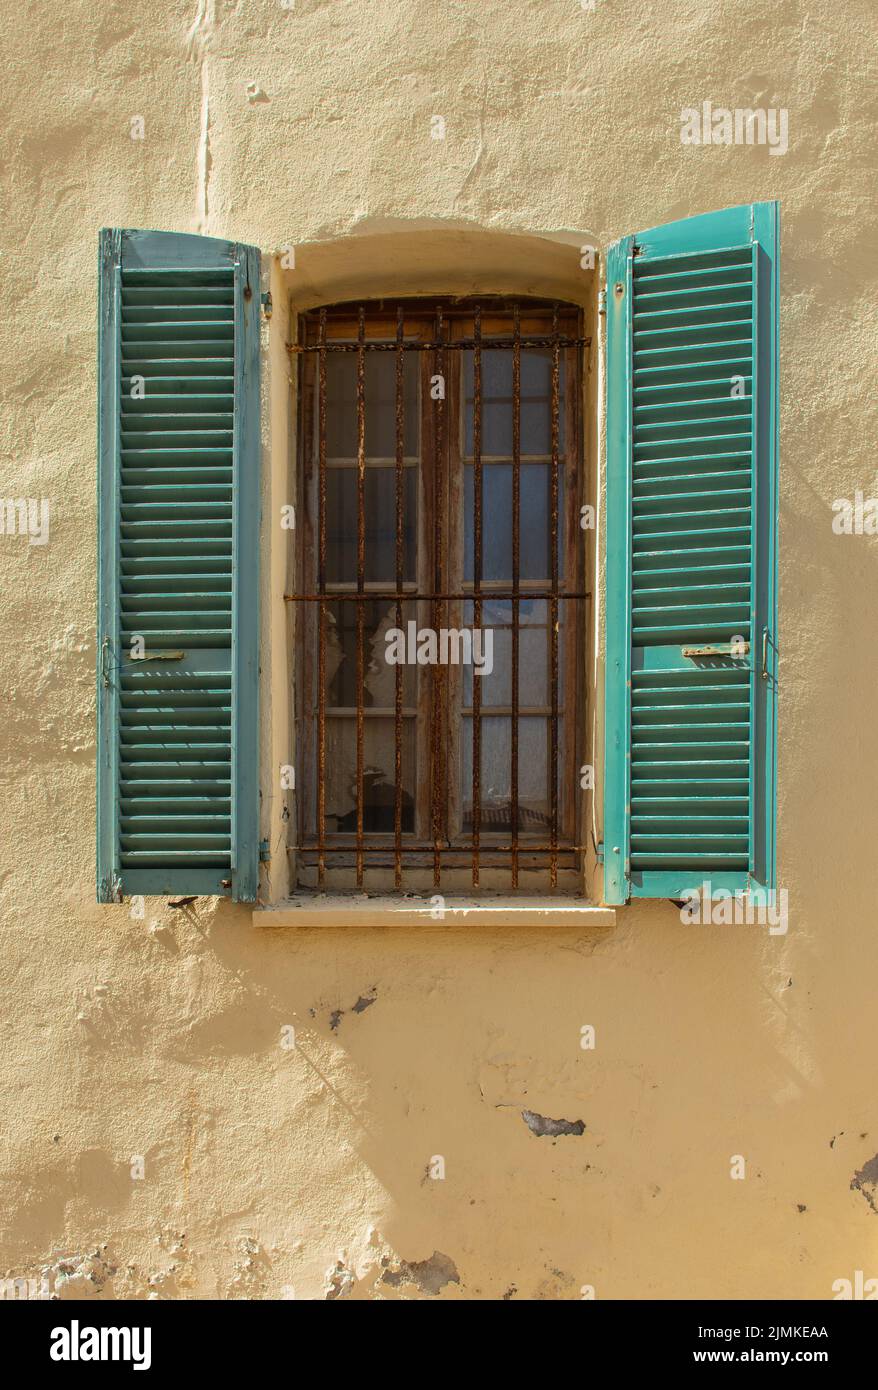 Old window with wooden shutters and rusty grille. Stock Photo